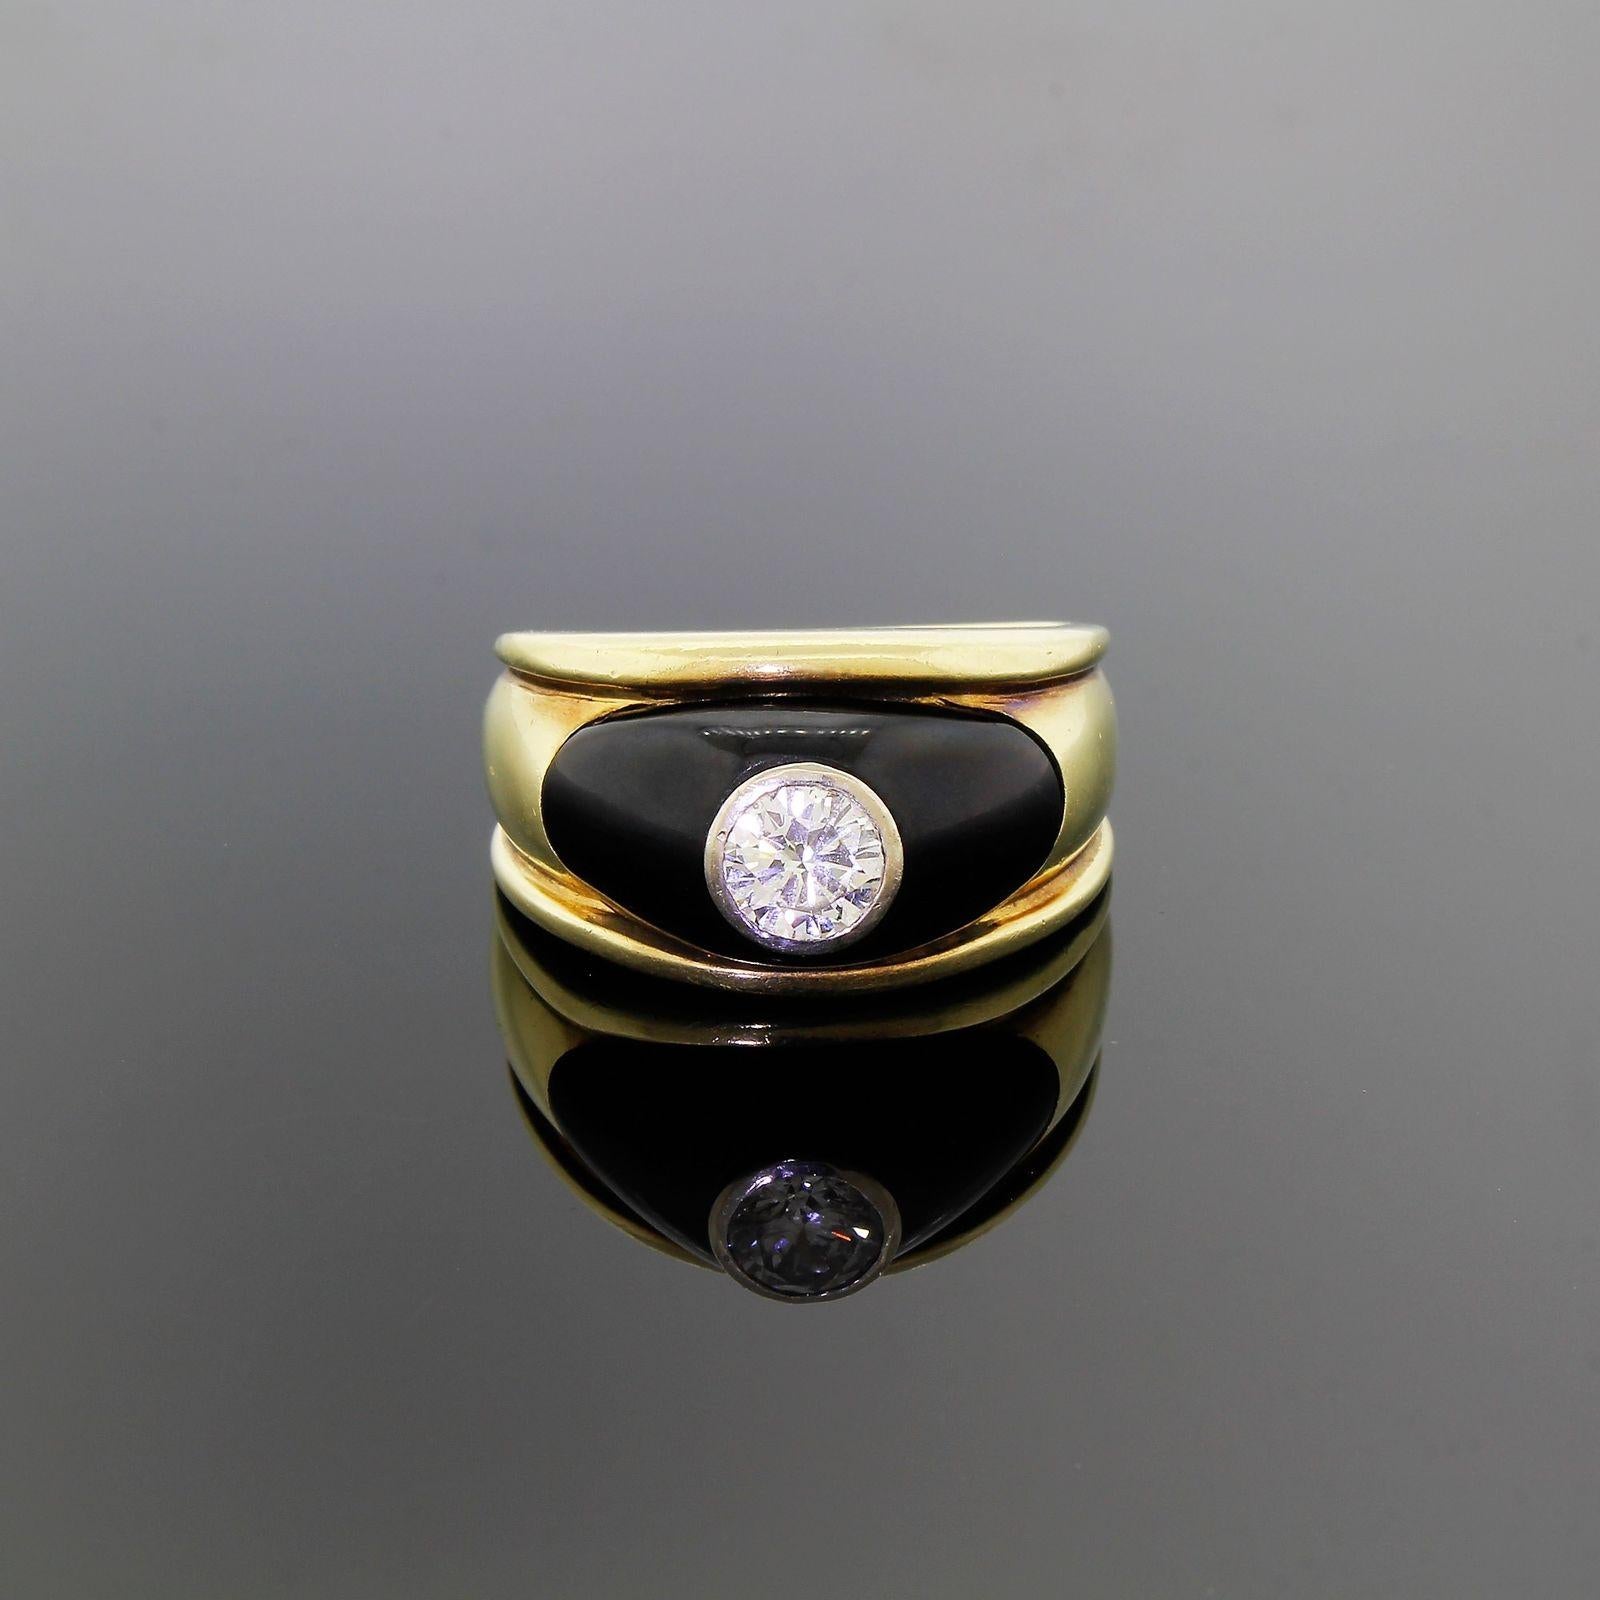 Vintage Gentleman's 1940's Round Solitaire Ring in 14k Yellow Gold Mounting with Black Onyx accent.
Very substantial in both size and weight and looks amazing when worn a true classy not to mention timeless piece of jewelry.
The ring projects